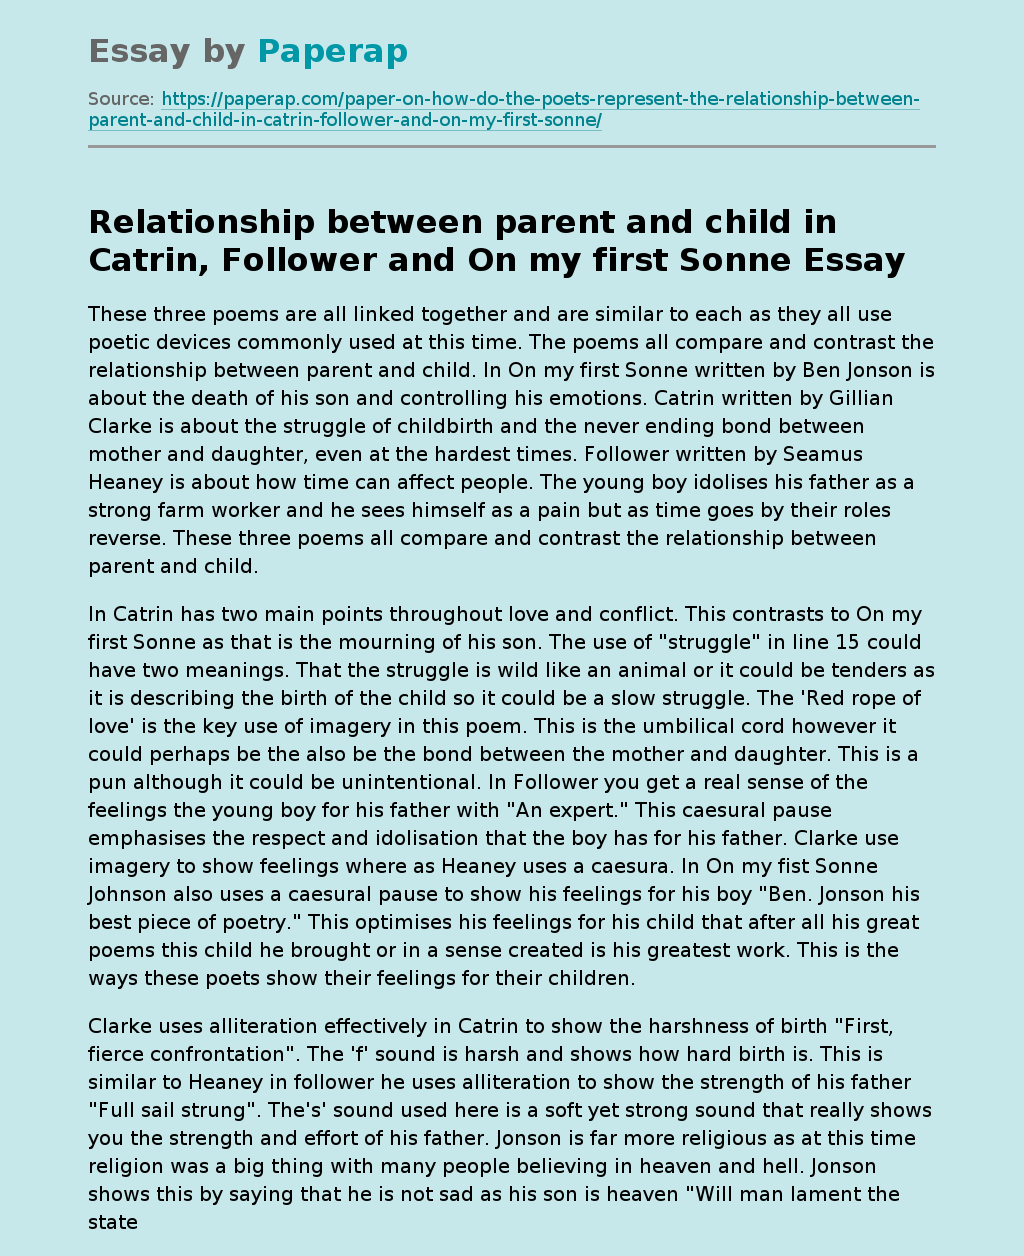 Relationship Between Parent and Child in Catrin, Follower and On my first Sonne